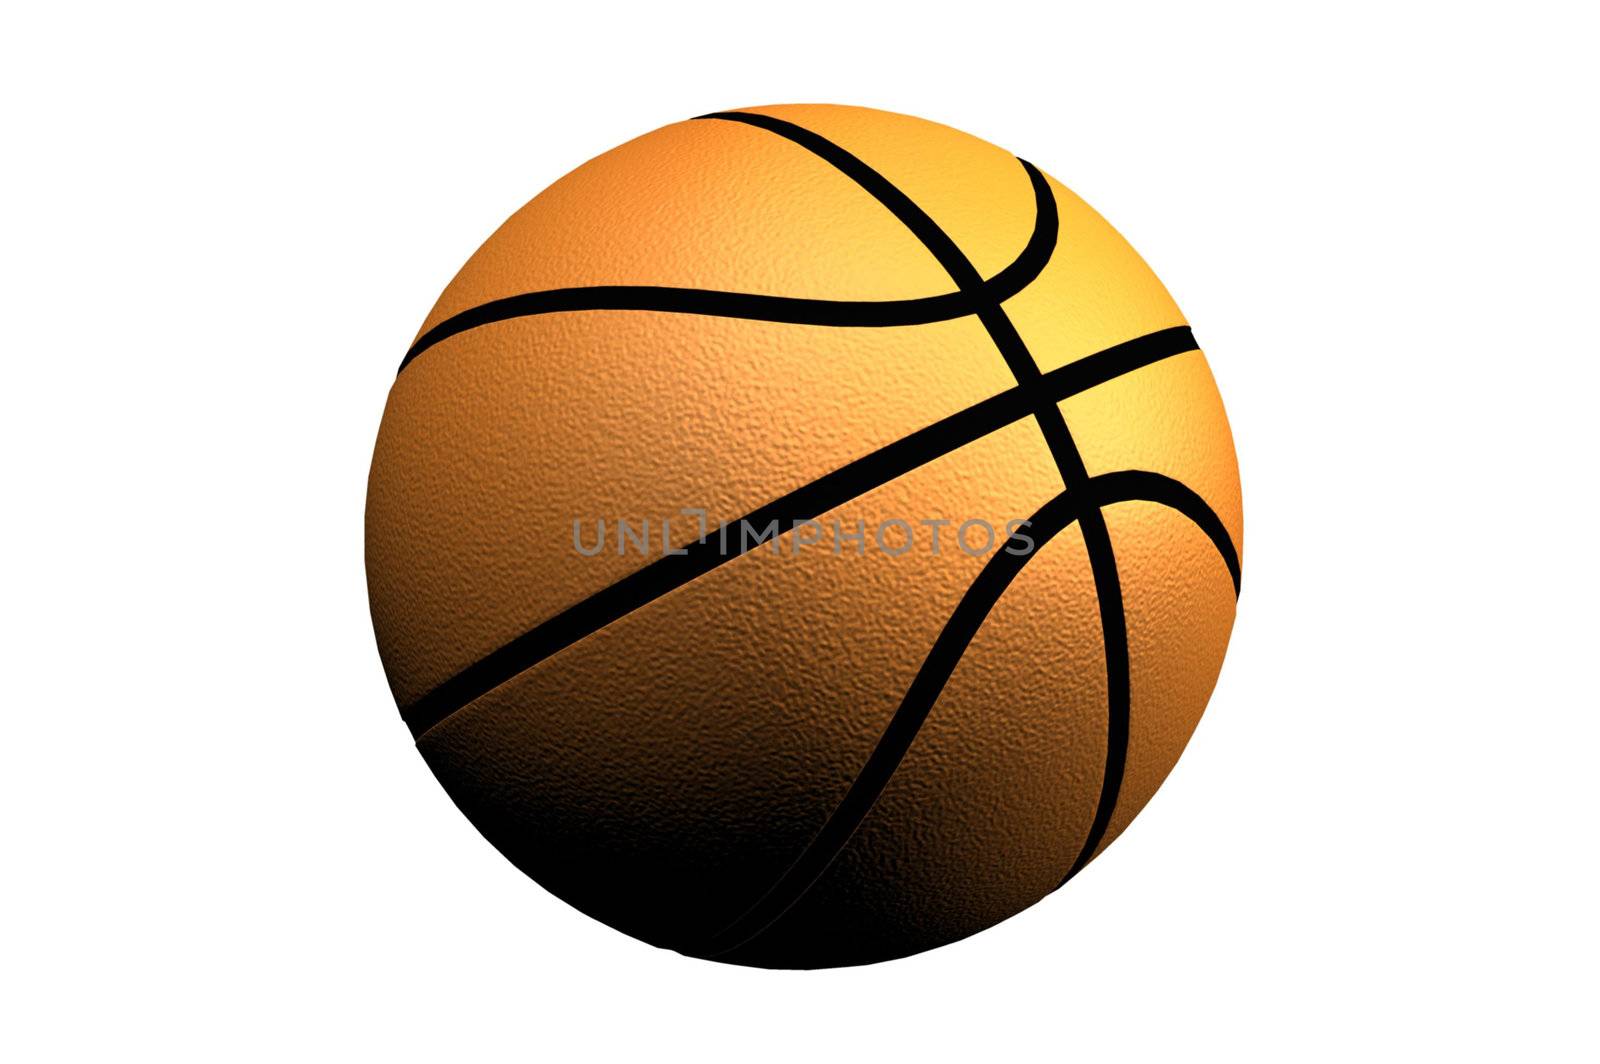 A Colourful 3d Rendered Isolated Basketball Illustration